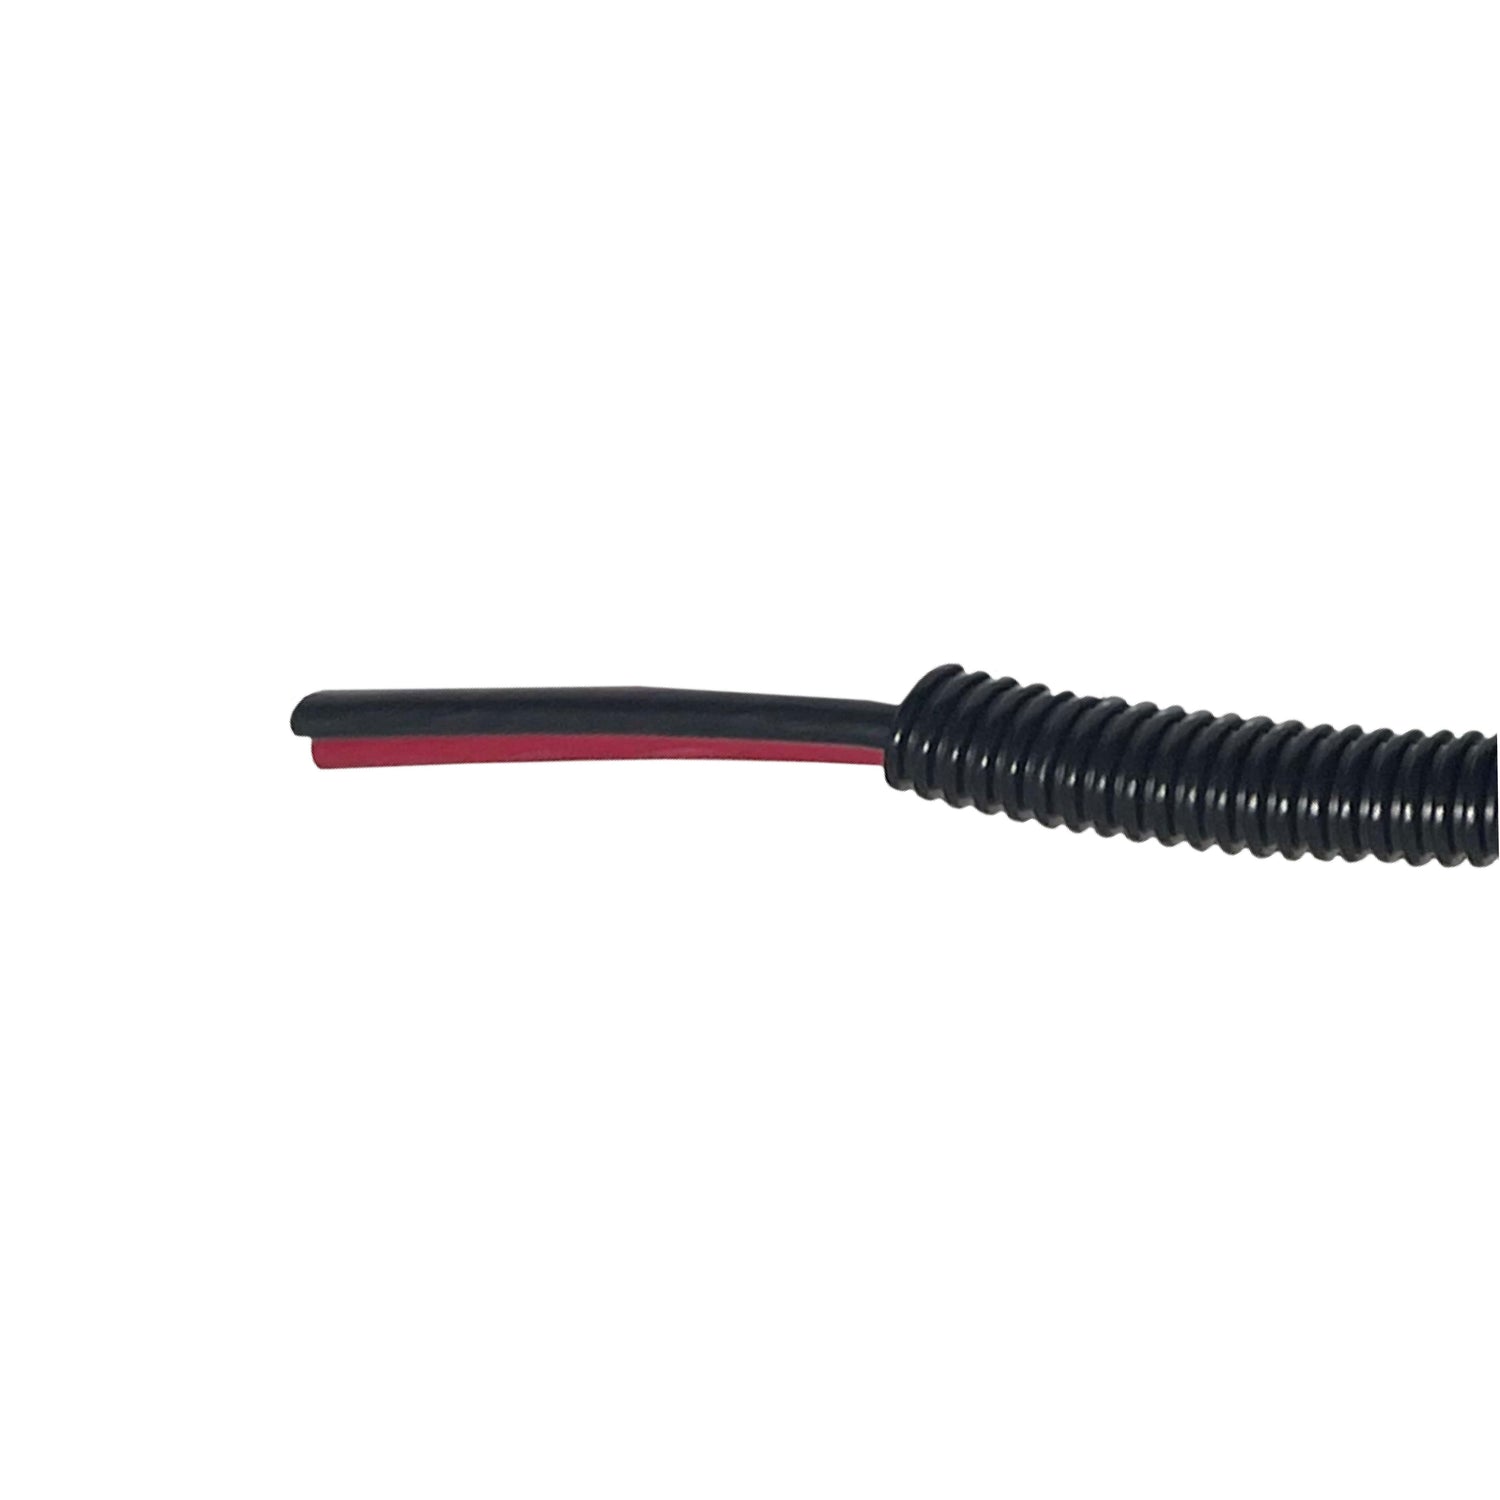 Future-Solutions-Solar-Charge-Cable-10-Awg-Red-Black-bonded-wire-Length-35-feet-CC-35X-end